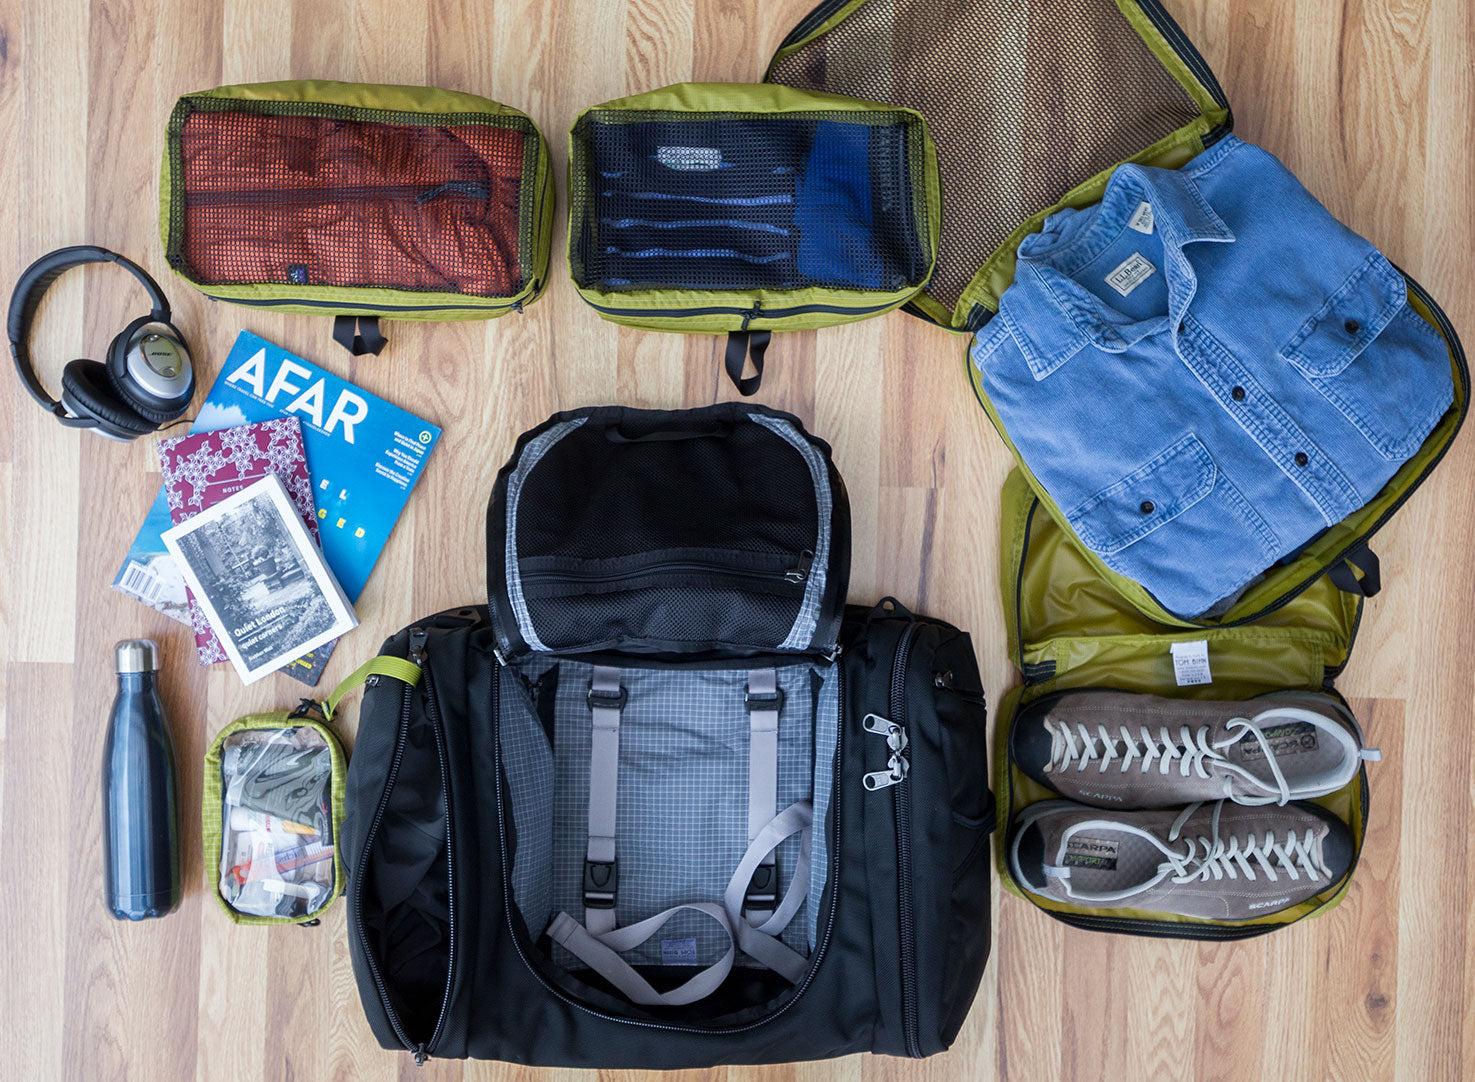 Aeronaut 45 Travel Bag with Packing Cubes by TOM BIHN